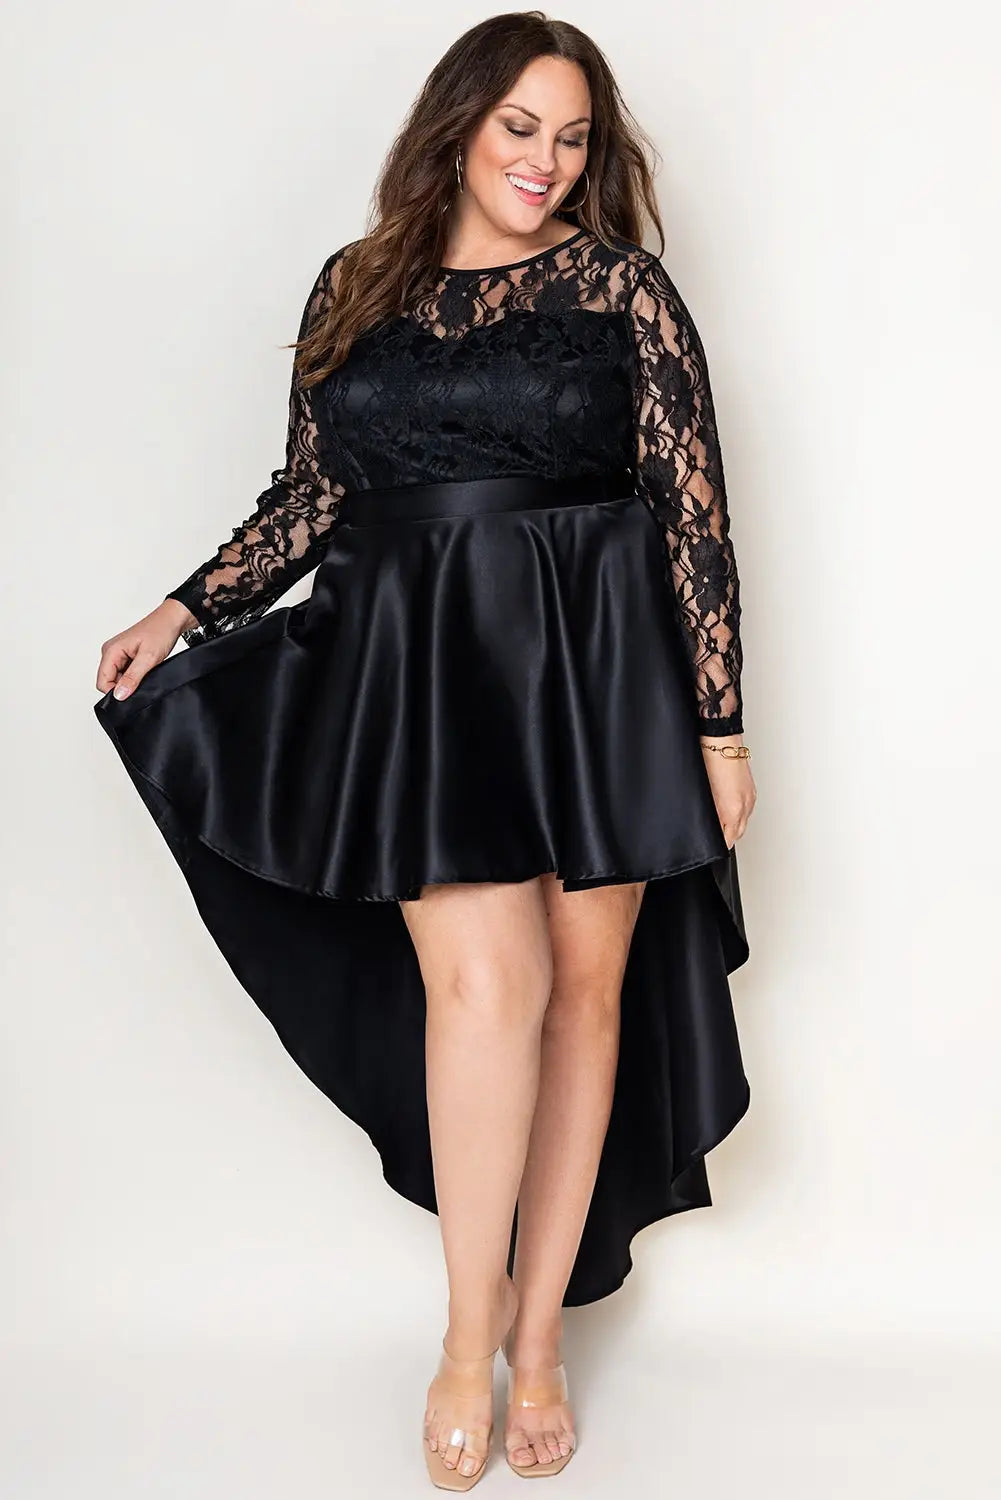 Black plus size sheer lace splice high low satin dress - 1x / 100% polyester